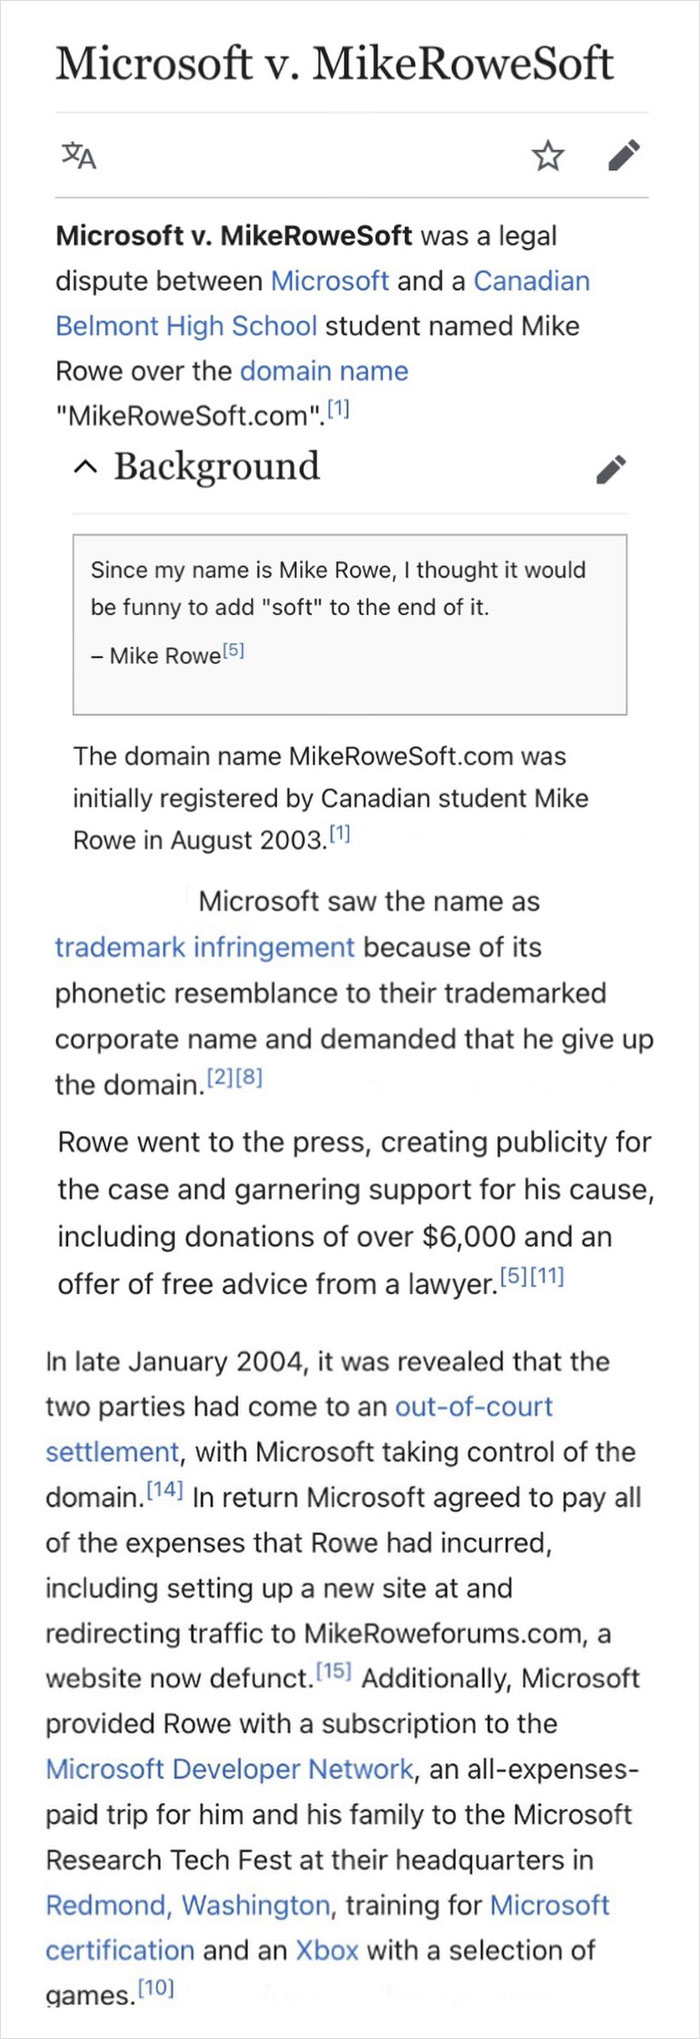 In 2003, A High Schooler Named Mike Rowe Had His Website Cease-And-Desisted By Microsoft. Eventually, After Media Attention, The Tech Giant Gave Him A Settlement Including A Trip To Microsoft Tech Fest And An Xbox